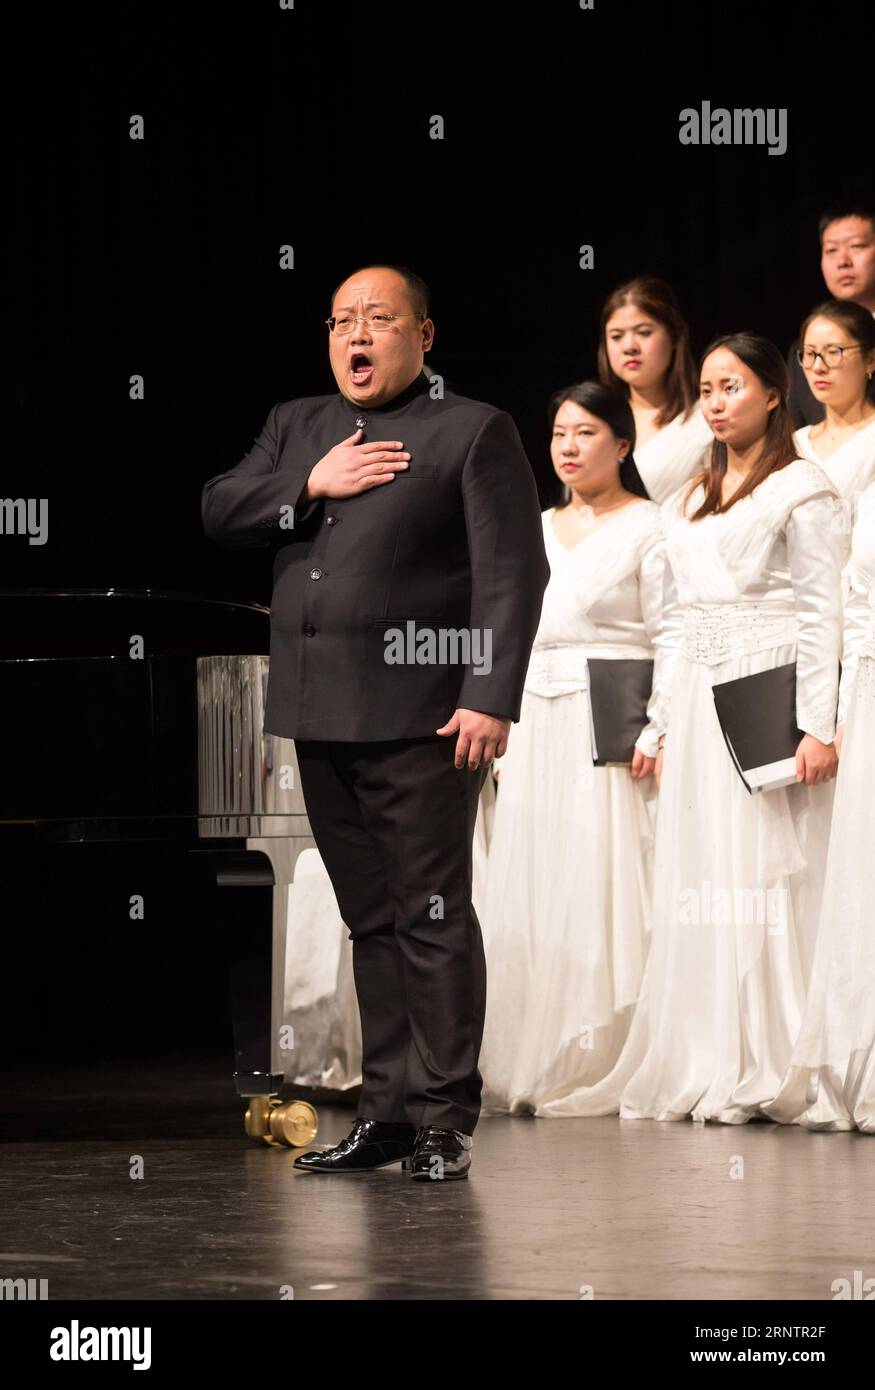 (171115) -- GENEVA, Nov. 15, 2017 -- Li Shuang (Front), tenor of China National Opera House, performs at a concert in Saint-Prex, a Swiss town near Lake Leman, on Nov. 15, 2017. China National Opera House held a performance here to promote cultural exchanges between China and Switzerland on Wednesday, attracting hundreds of locals and representatives of international organizations in Geneva. ) SWITZERLAND-SAINT-PREX-CHINA NATIONAL OPERA HOUSE-PERFORMANCE XuxJinquan PUBLICATIONxNOTxINxCHN Stock Photo